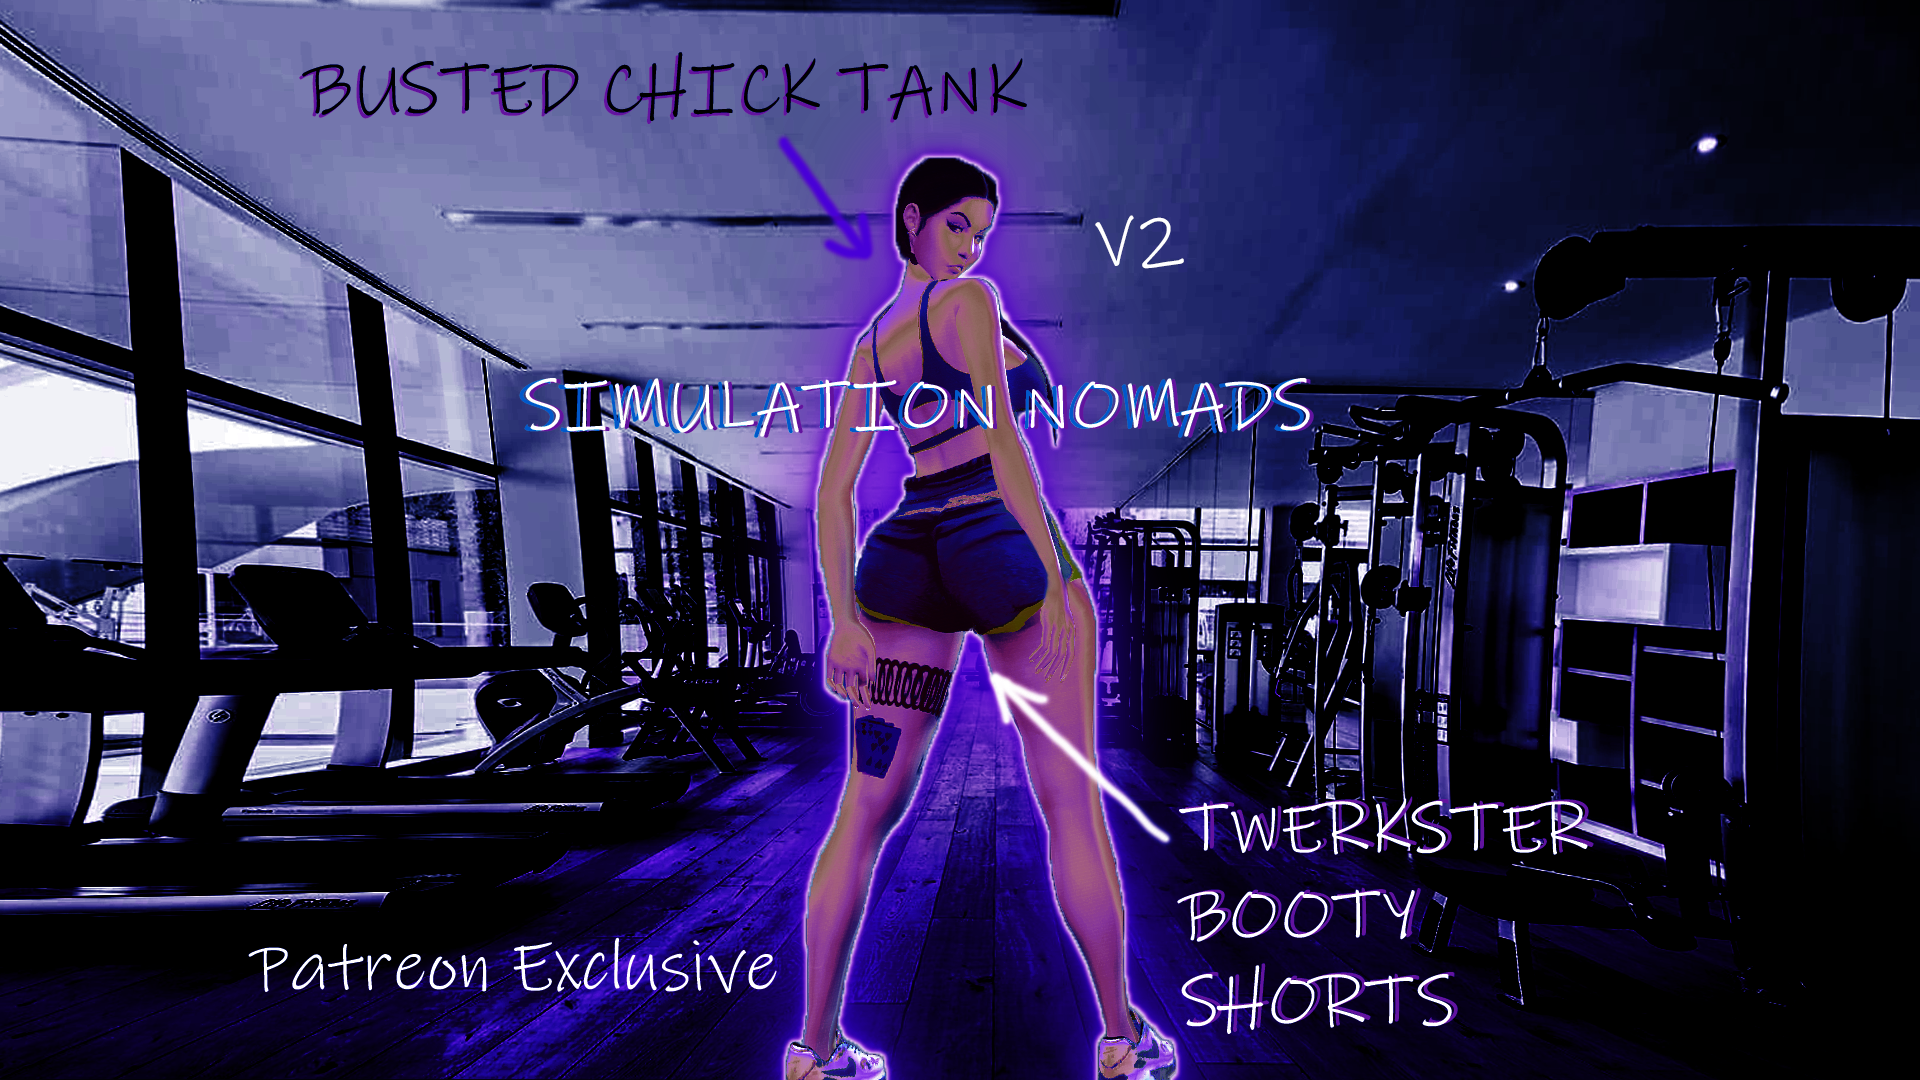 817571003_SimulationNomadsFitnesstopanbottomsetPEv2.png.bcf8229aa6676685842d52a54a0f948c.png